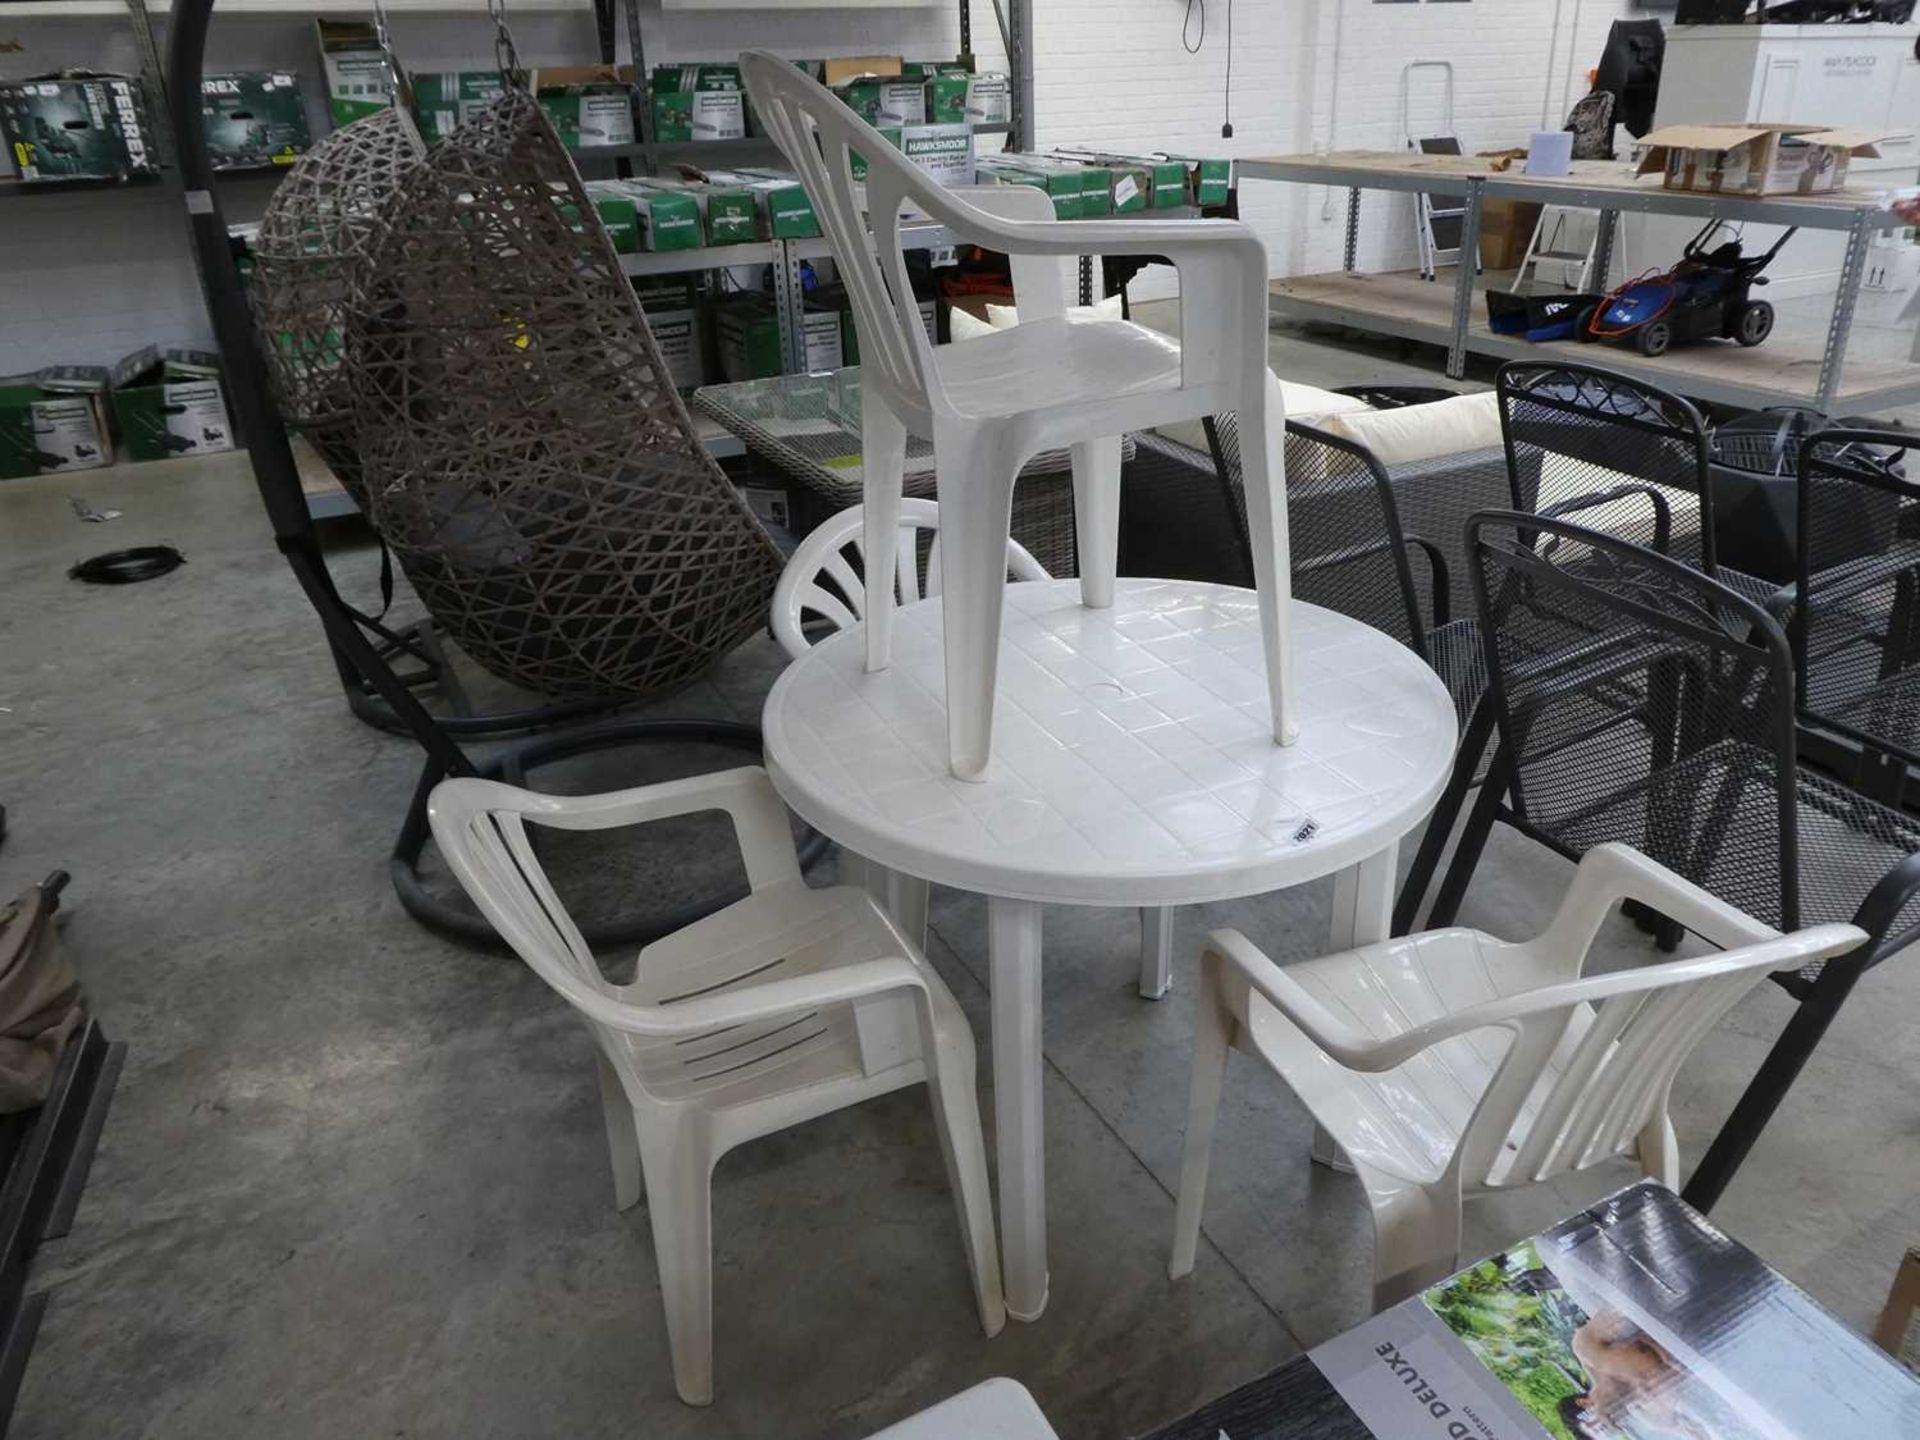 White plastic 5 piece outdoor garden seating set comprising circular table and 4 chairs